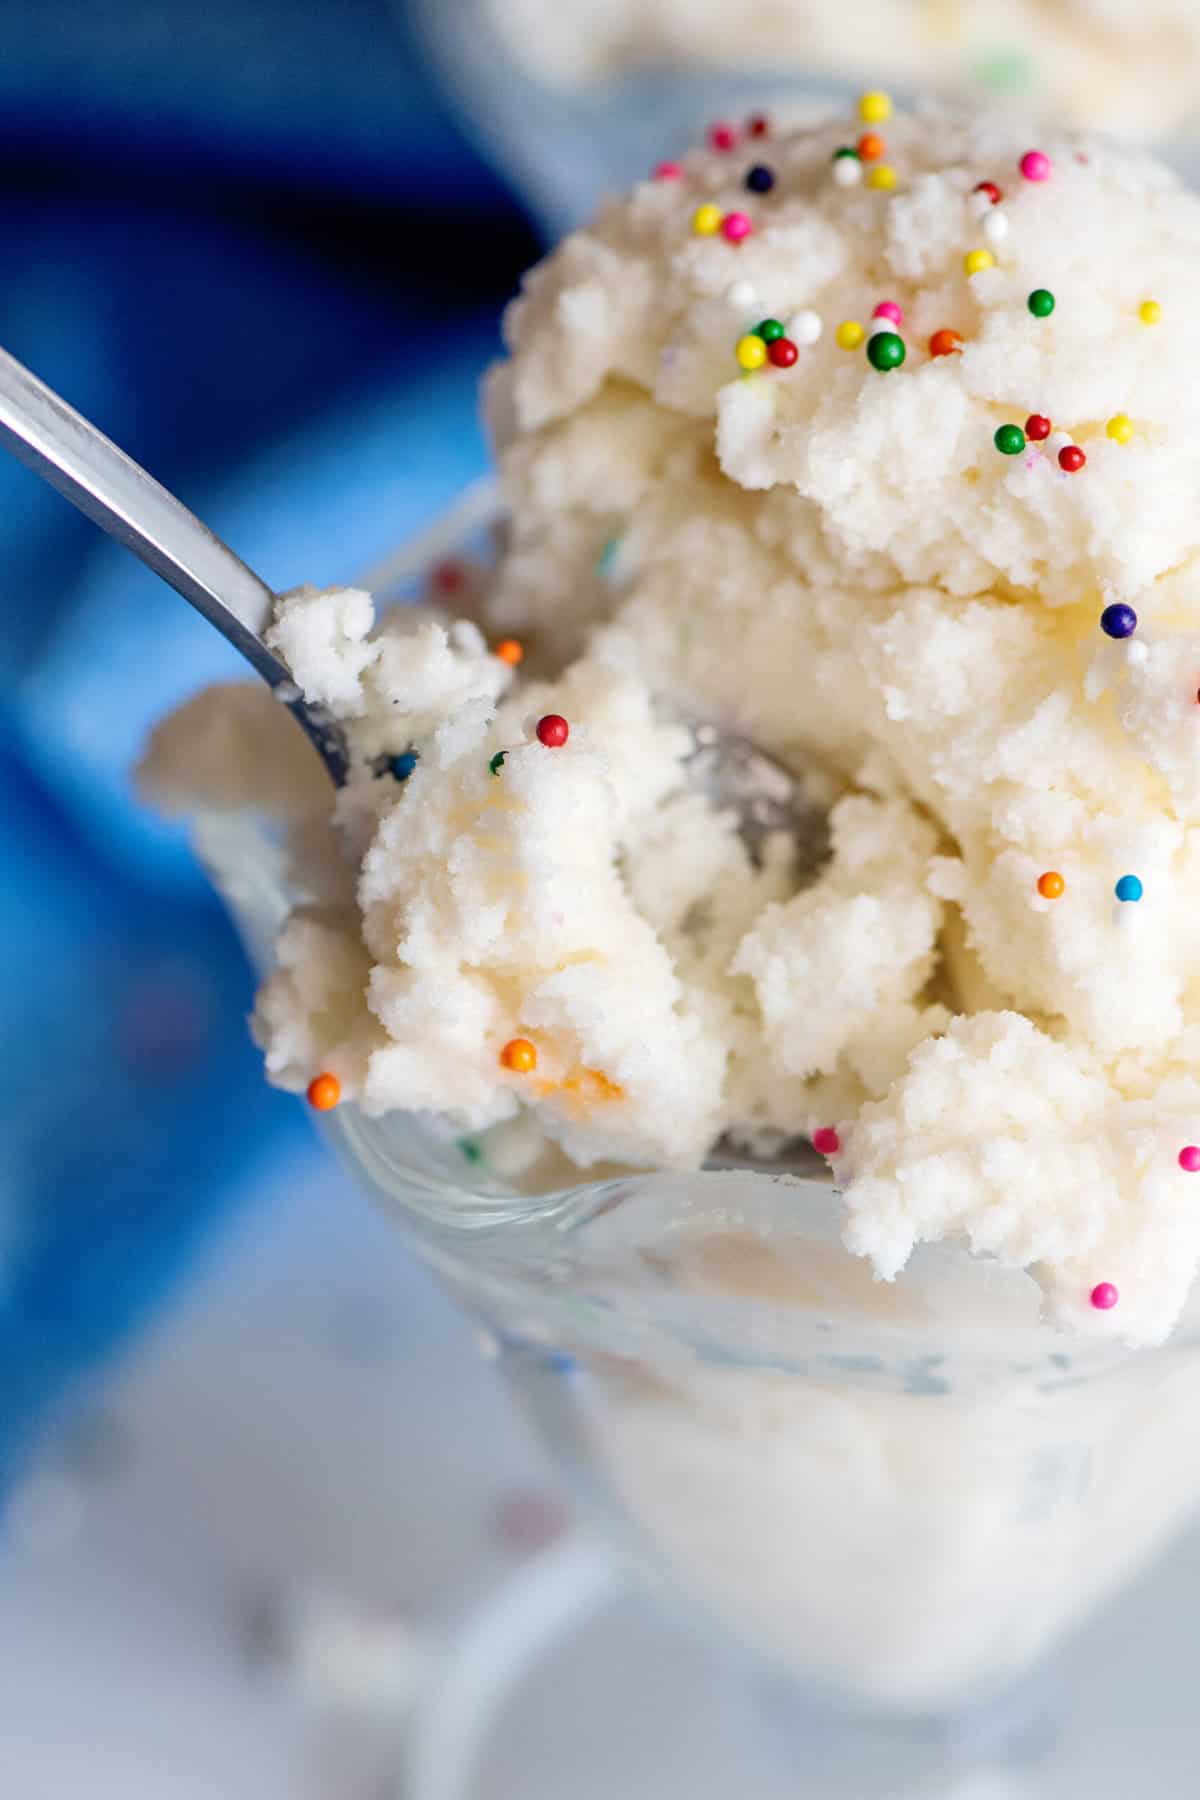 A spoonful of snow cream.